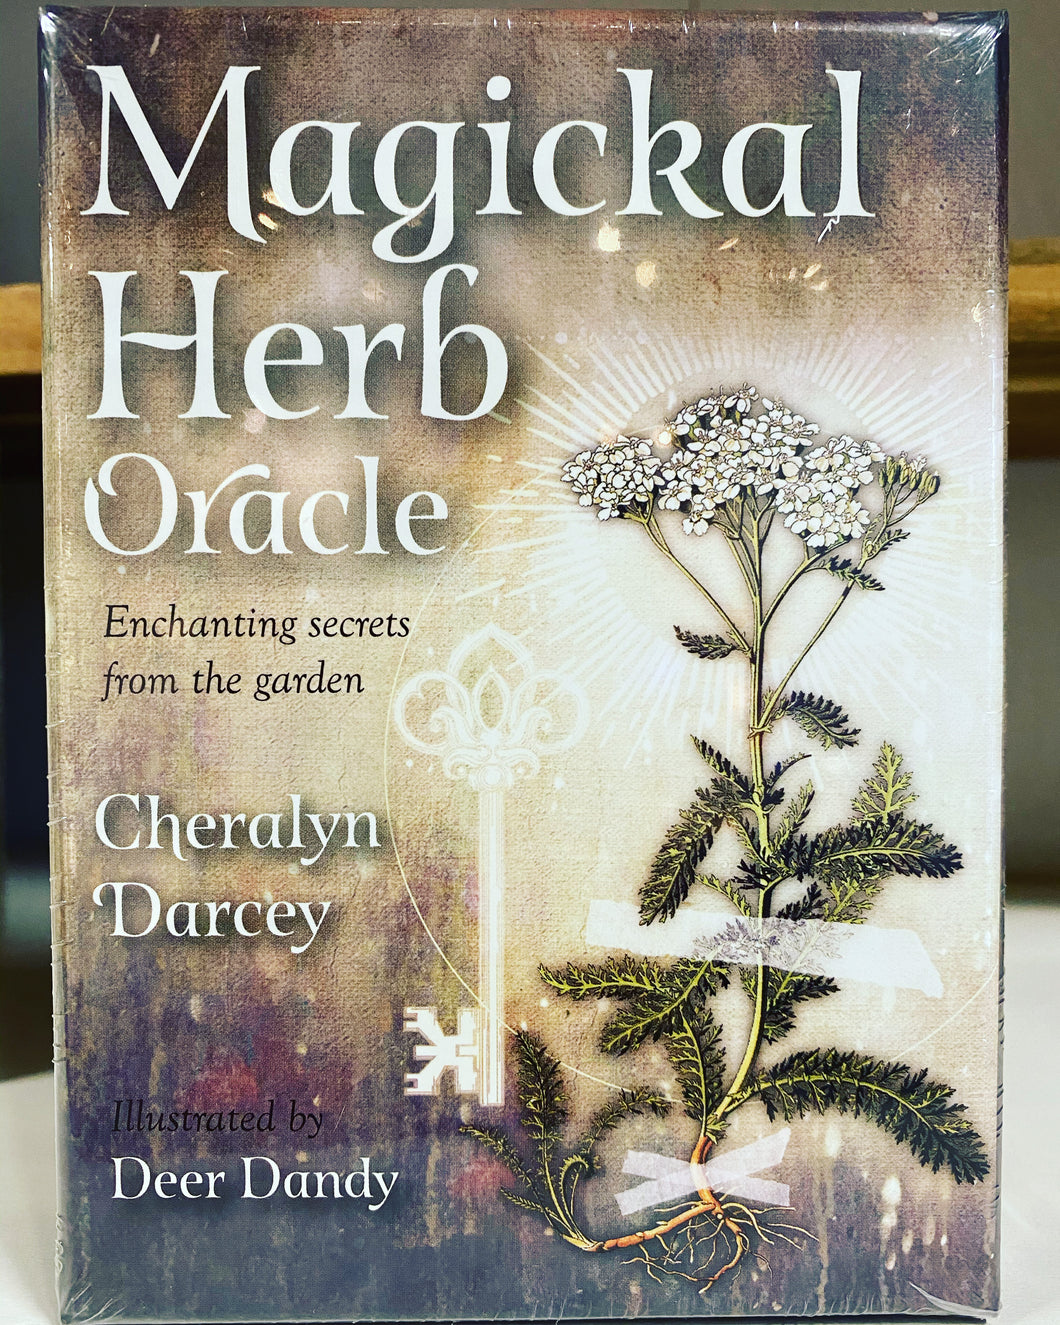 Magickal Herb Oracle cards